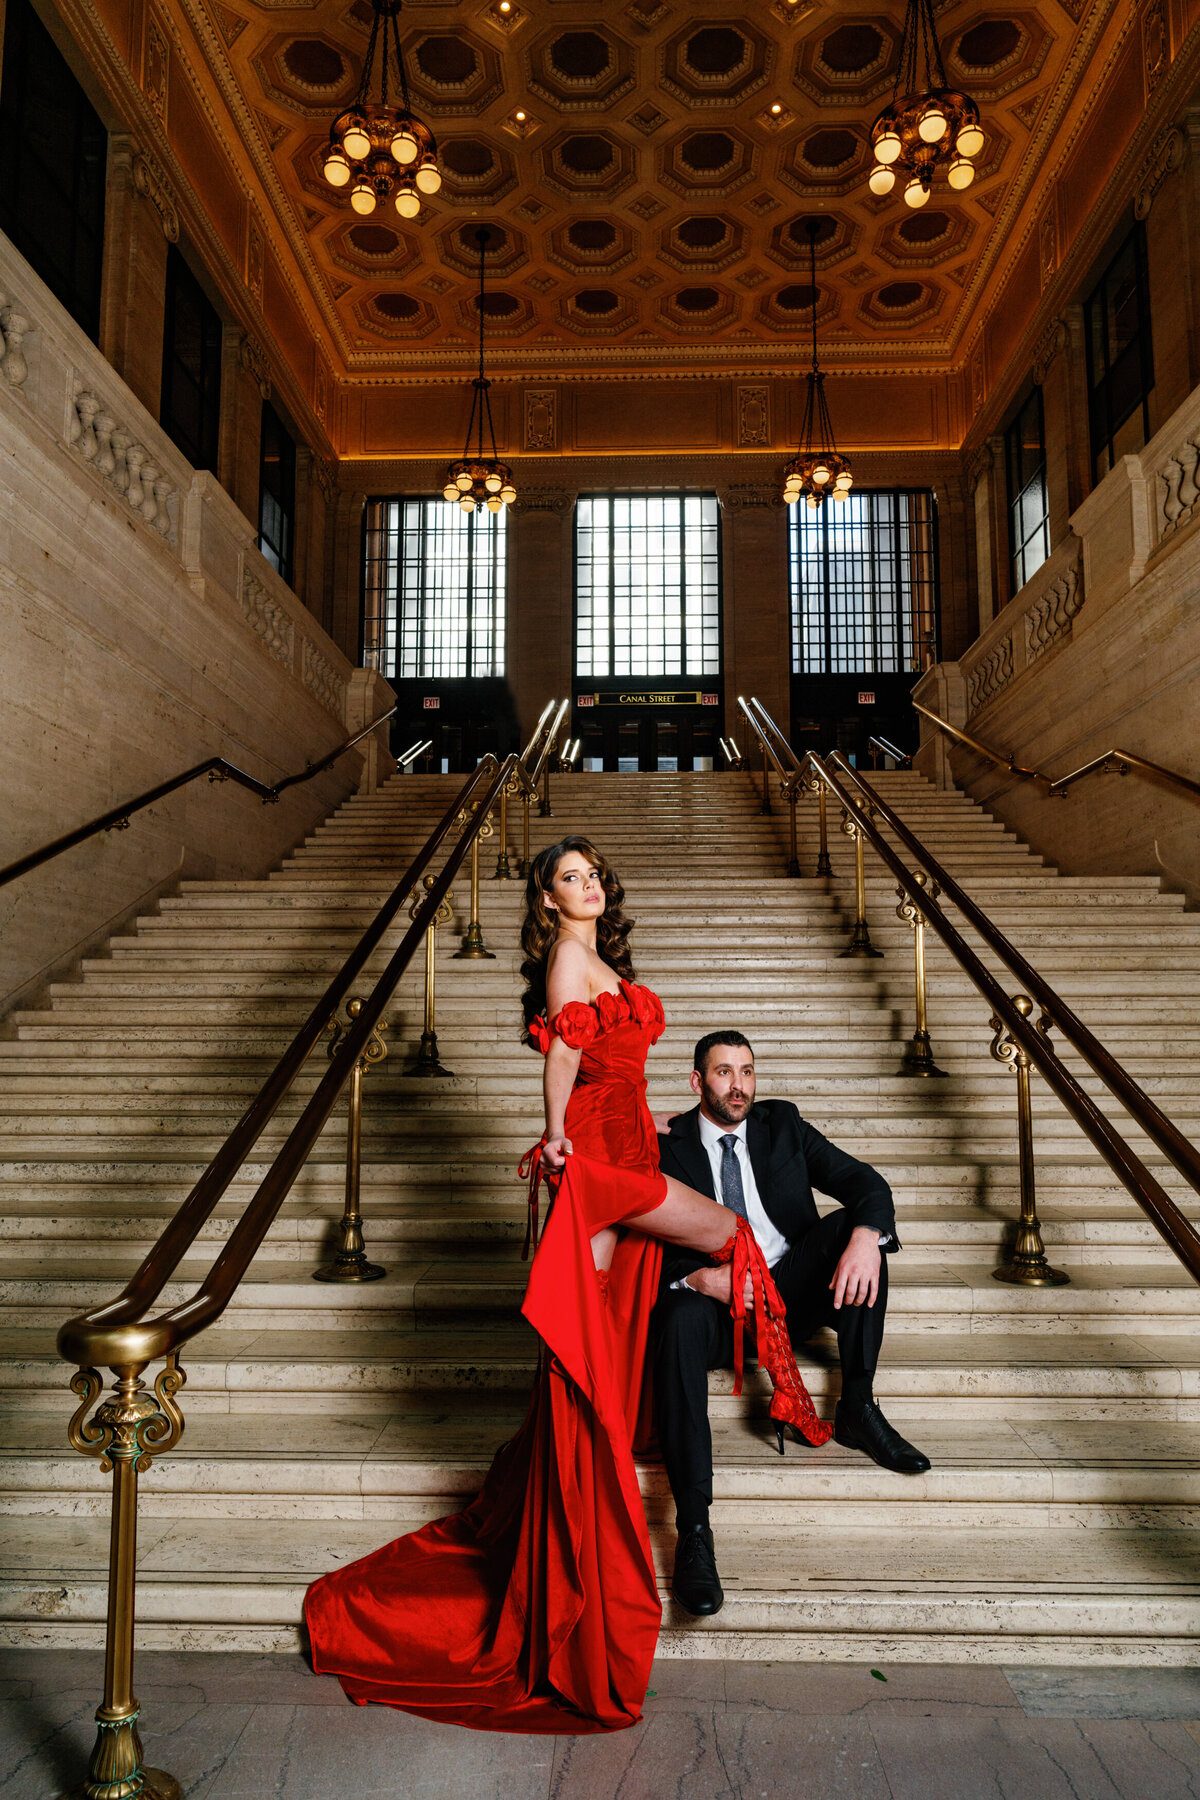 Aspen-Avenue-Chicago-Wedding-Photographer-Union-Station-Chicago-Theater-Engagement-Session-Timeless-Romantic-Red-Dress-Editorial-Stemming-From-Love-Bry-Jean-Artistry-The-Bridal-Collective-True-to-color-Luxury-FAV-23